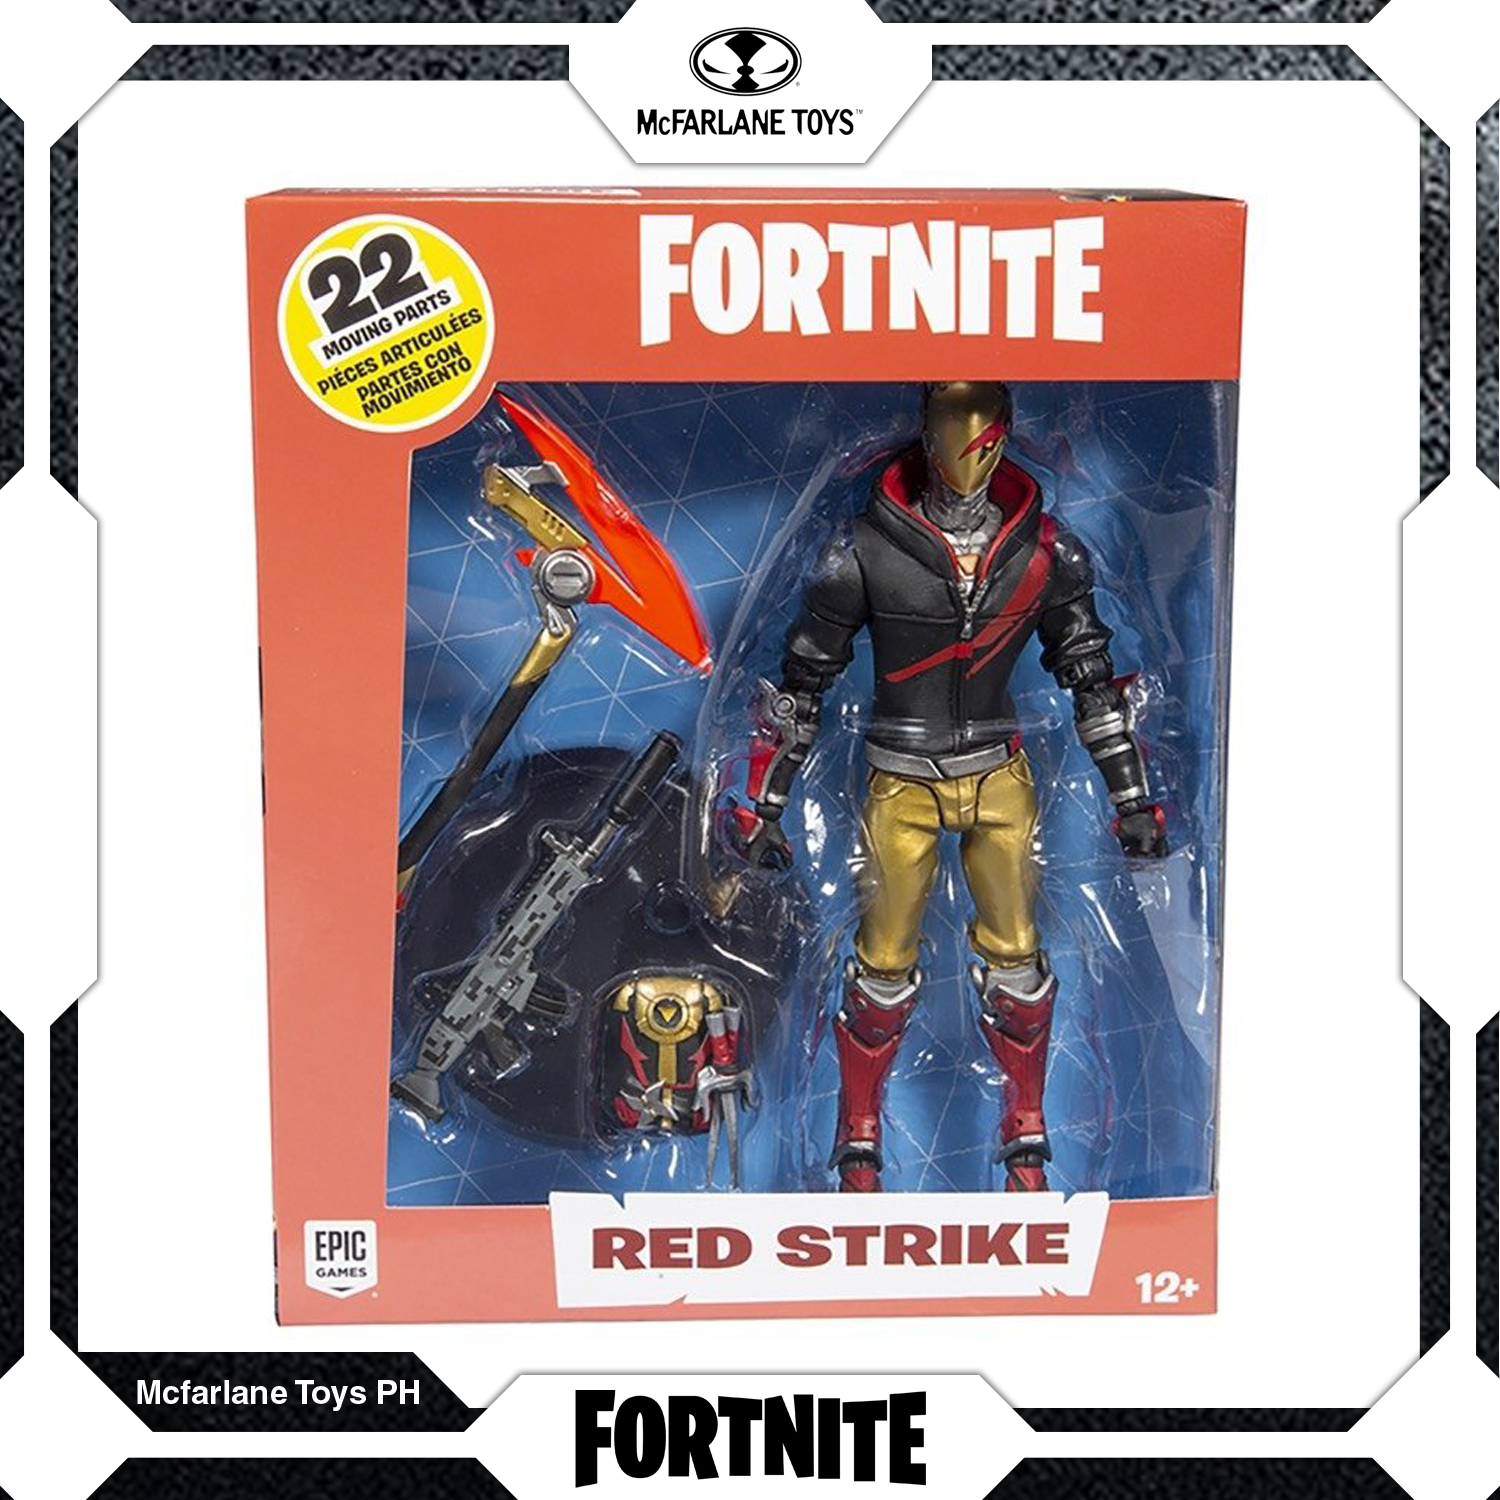 fortnite collectibles